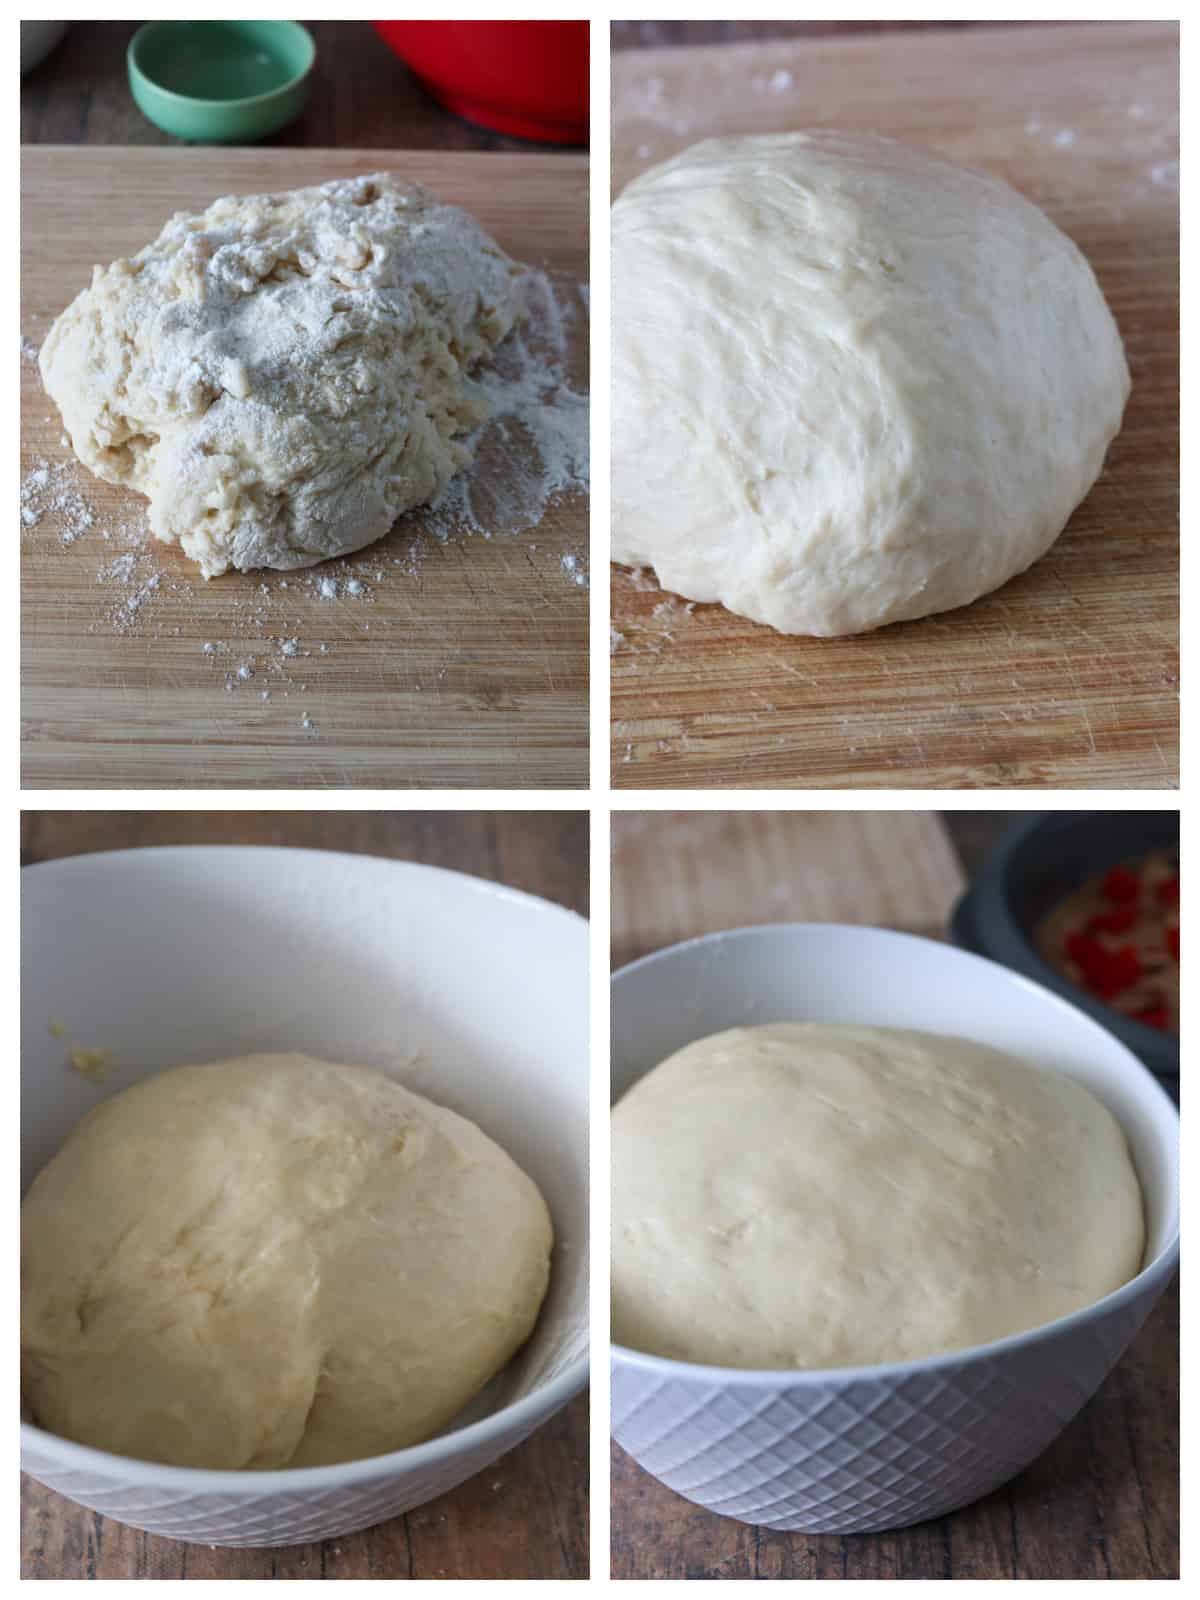 A collage showing the stages of dough: before kneading (upper left), after kneading (upper right), before the first rise (lower left) and after rising (lower right).